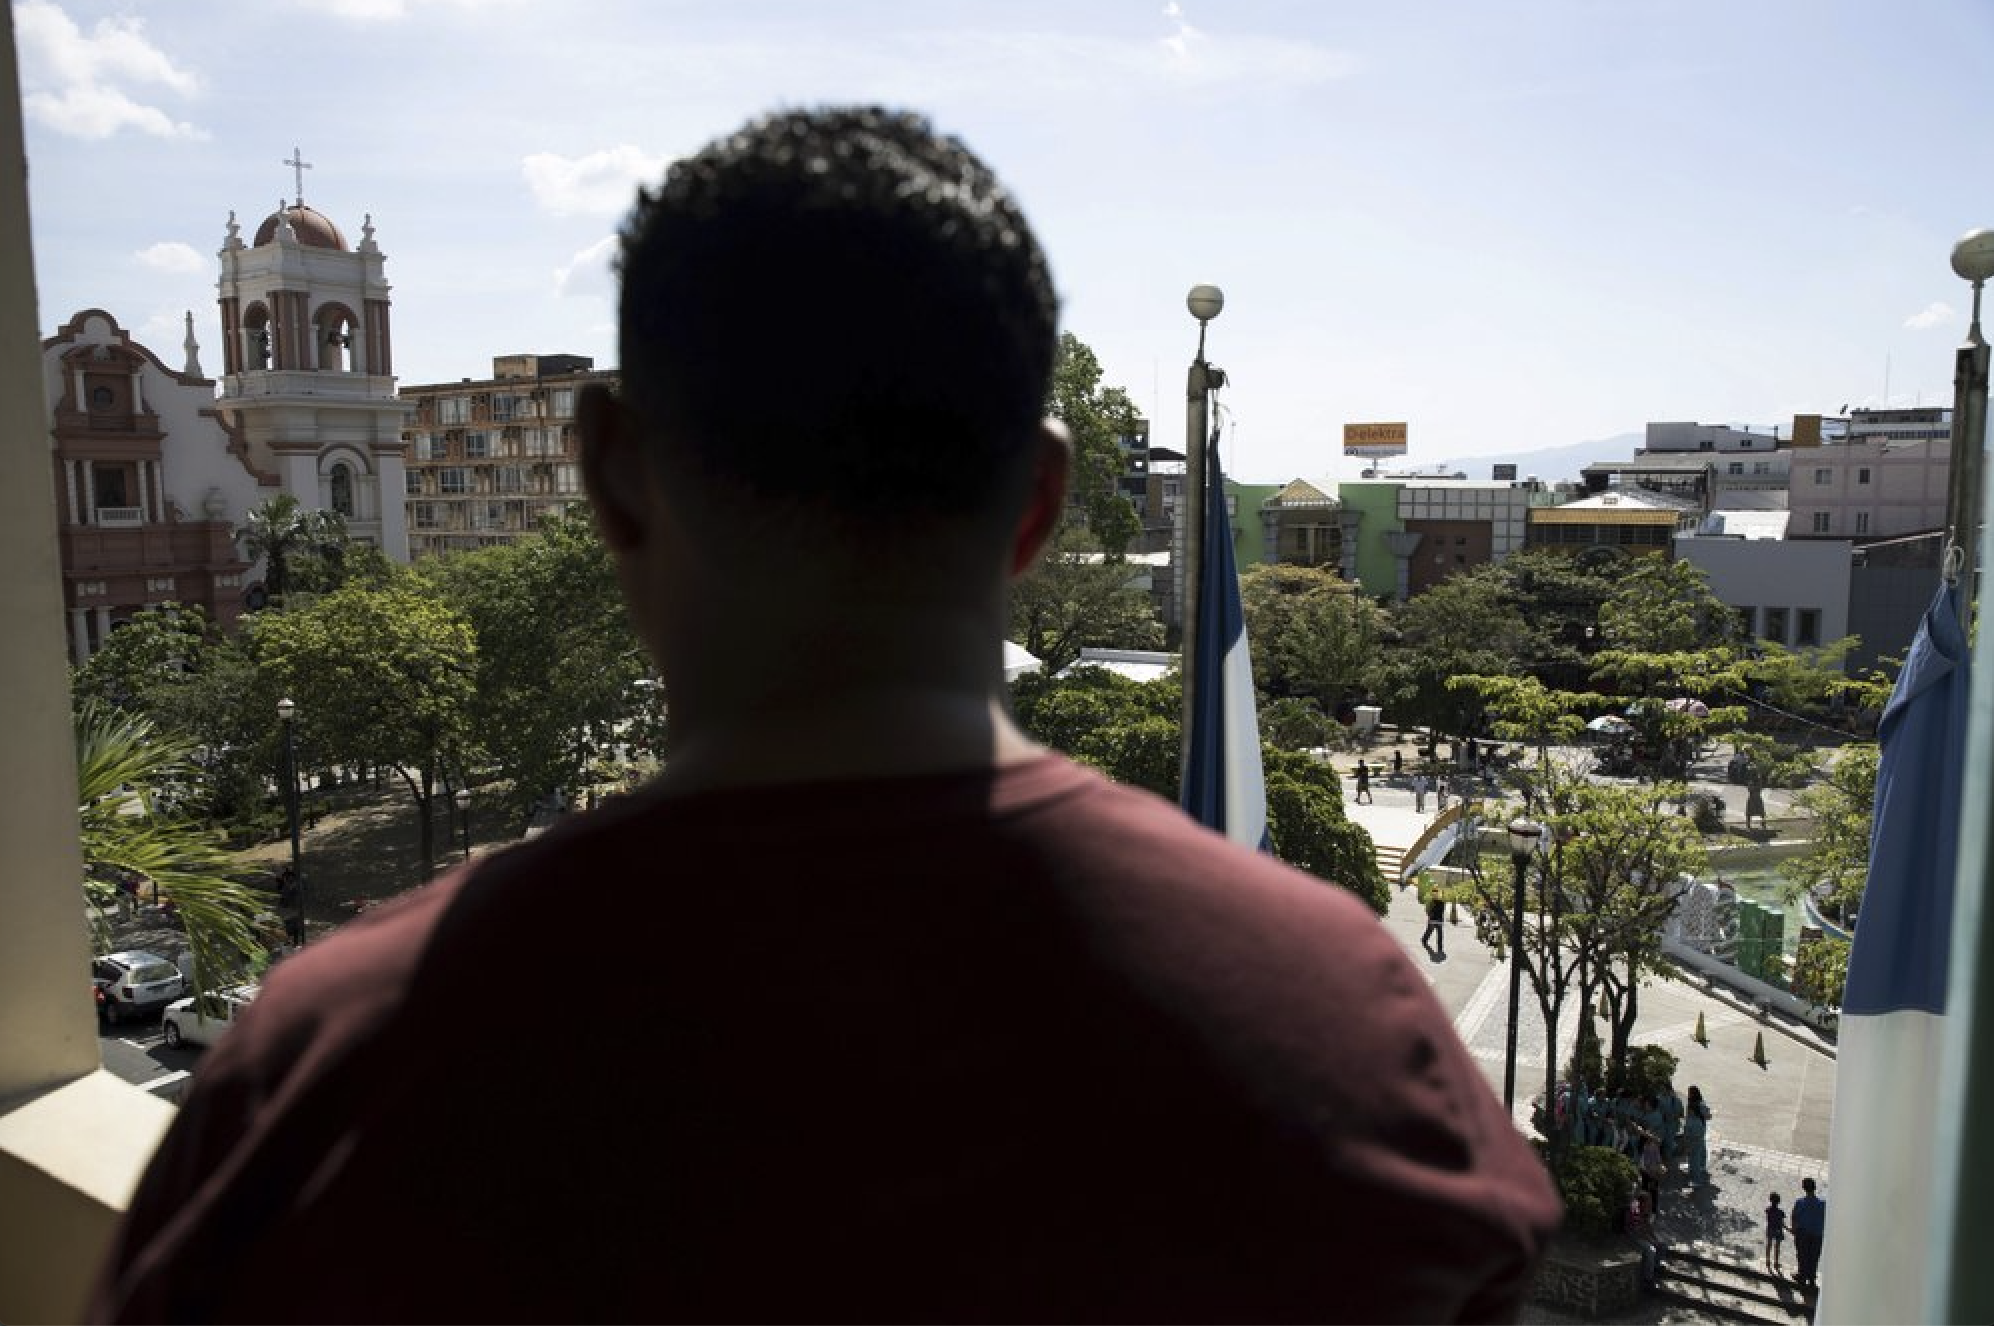 A Honduran man deported from the United States looks over the central park of San Pedro Sula, Honduras on Dec. 1, 2019. As he was walking in the area in November, a man stepped toward him, fired one shot from a pistol, and fled. He says he and his relatives have been hunted for more than 20 years by a powerful criminal family from his small hometown. "I've spent my whole life running. … One day they are going to get me." Image by Moises Castillo/ AP Photo. Honduras, 2019.